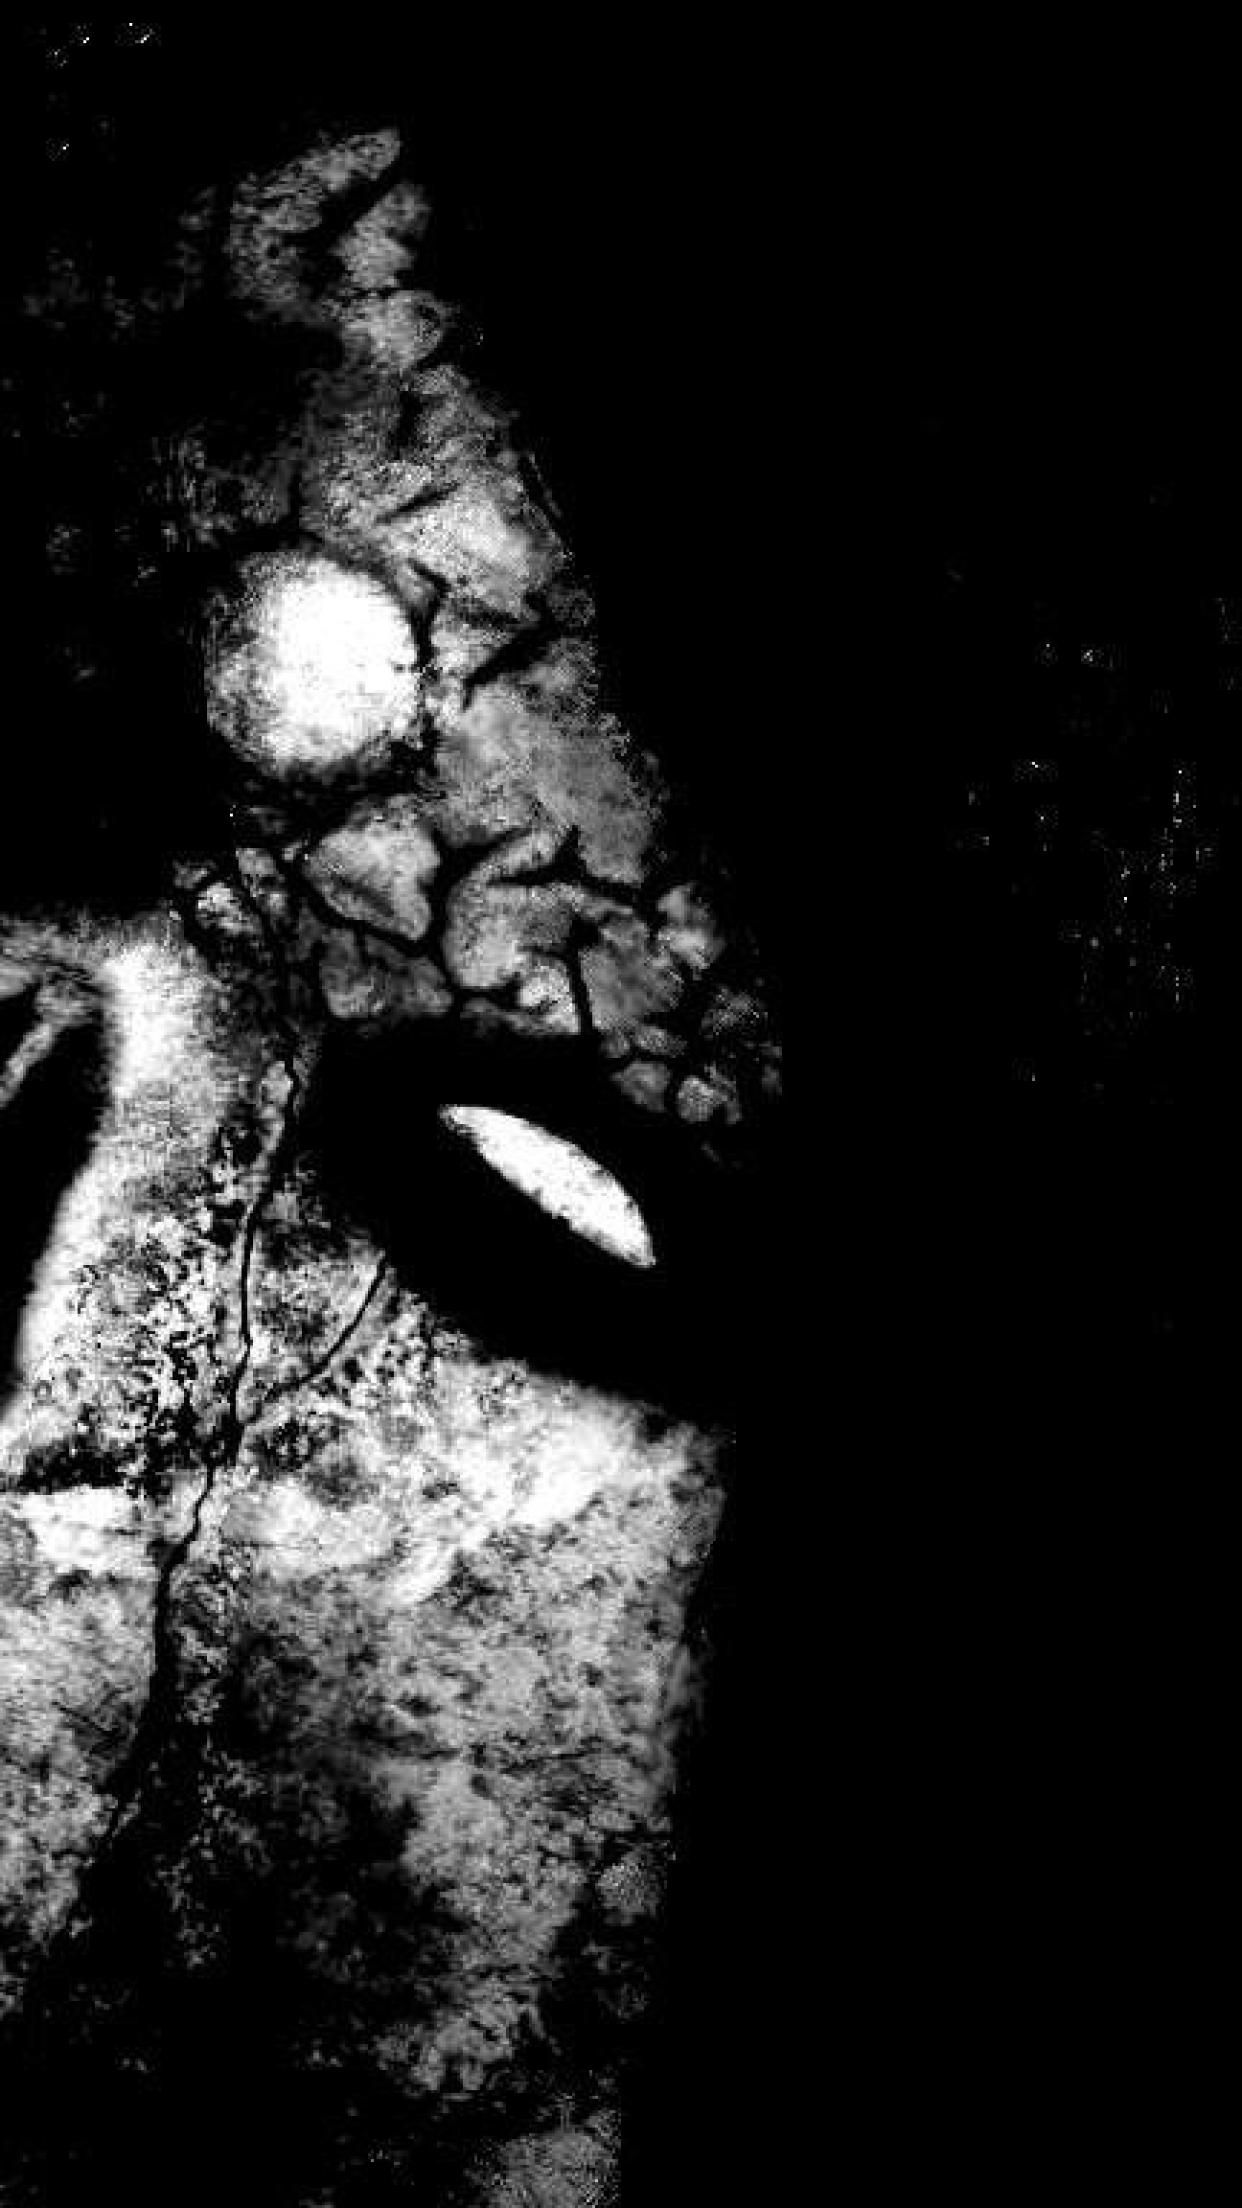 scary iphone wallpaper,black,darkness,black and white,monochrome photography,monochrome